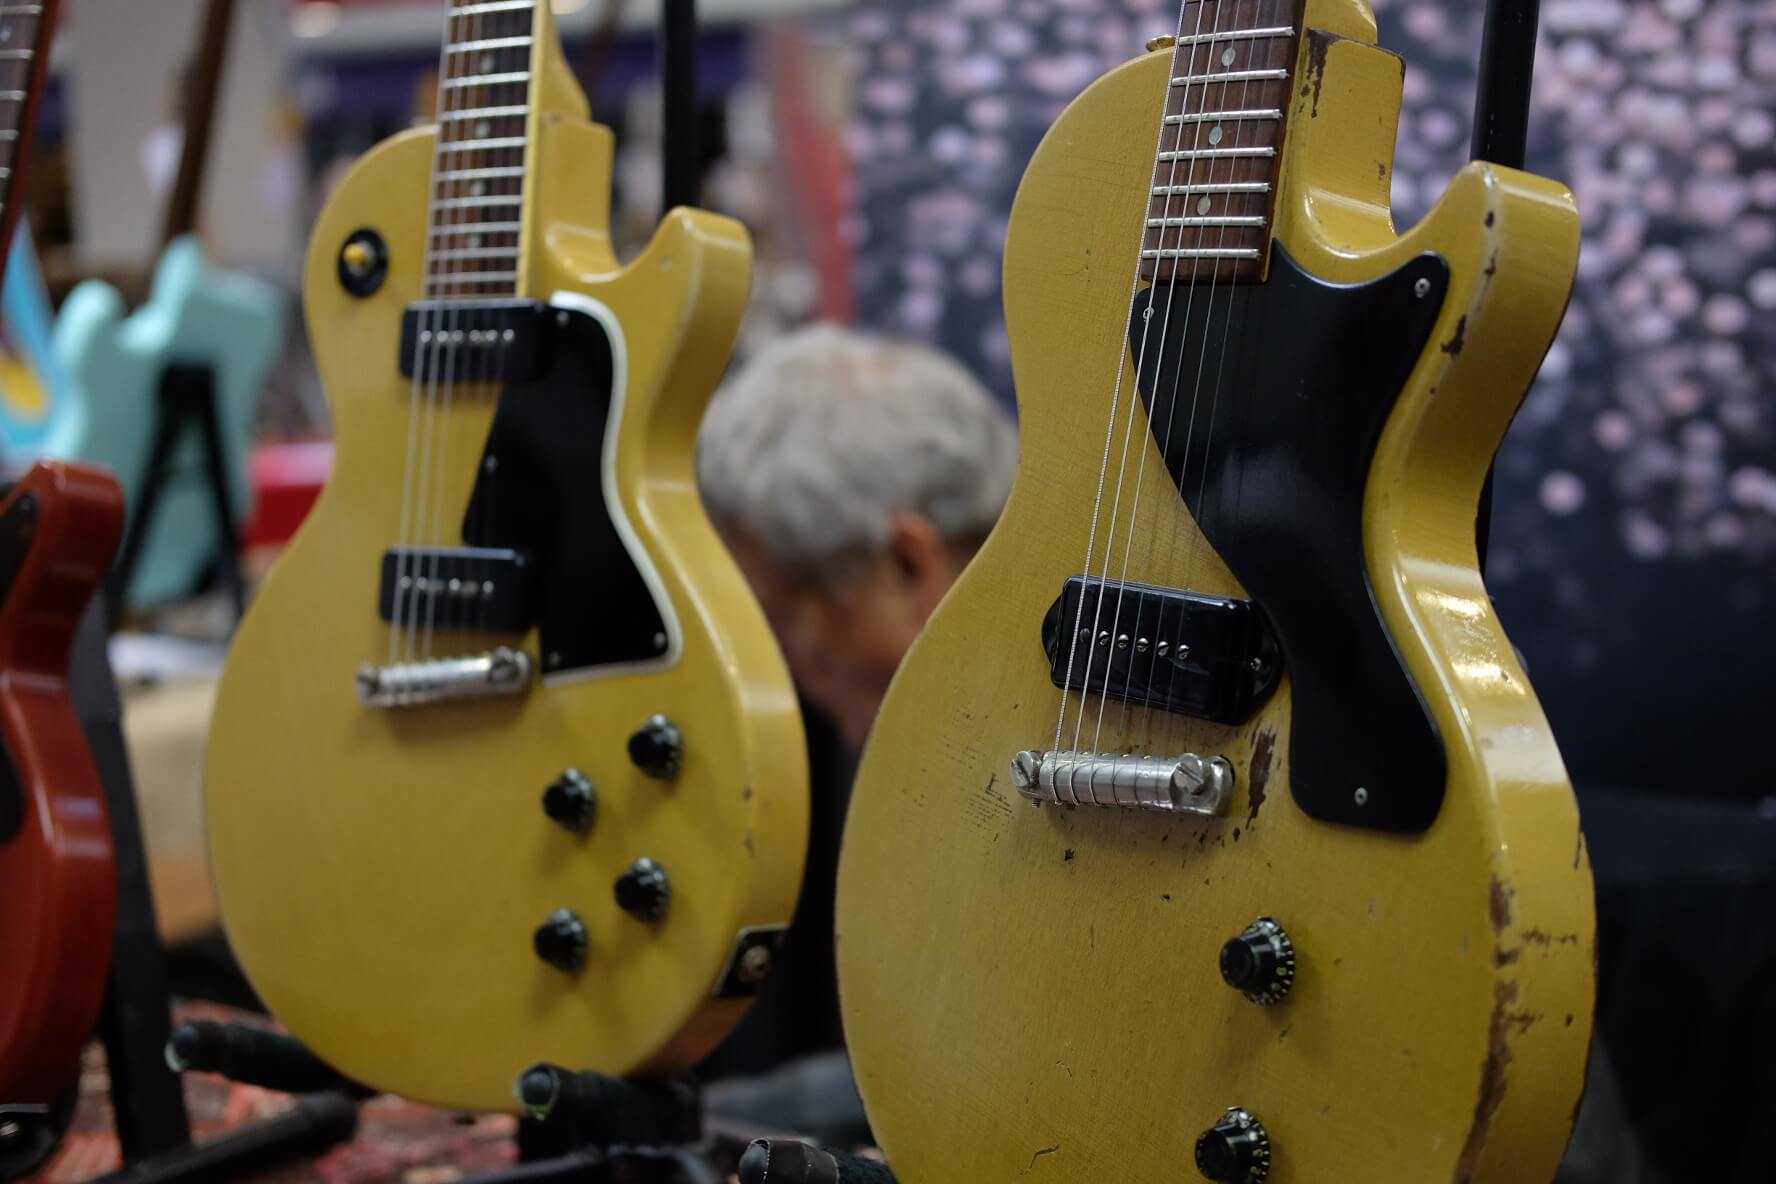 In Pictures: The London International Guitar Show 2018